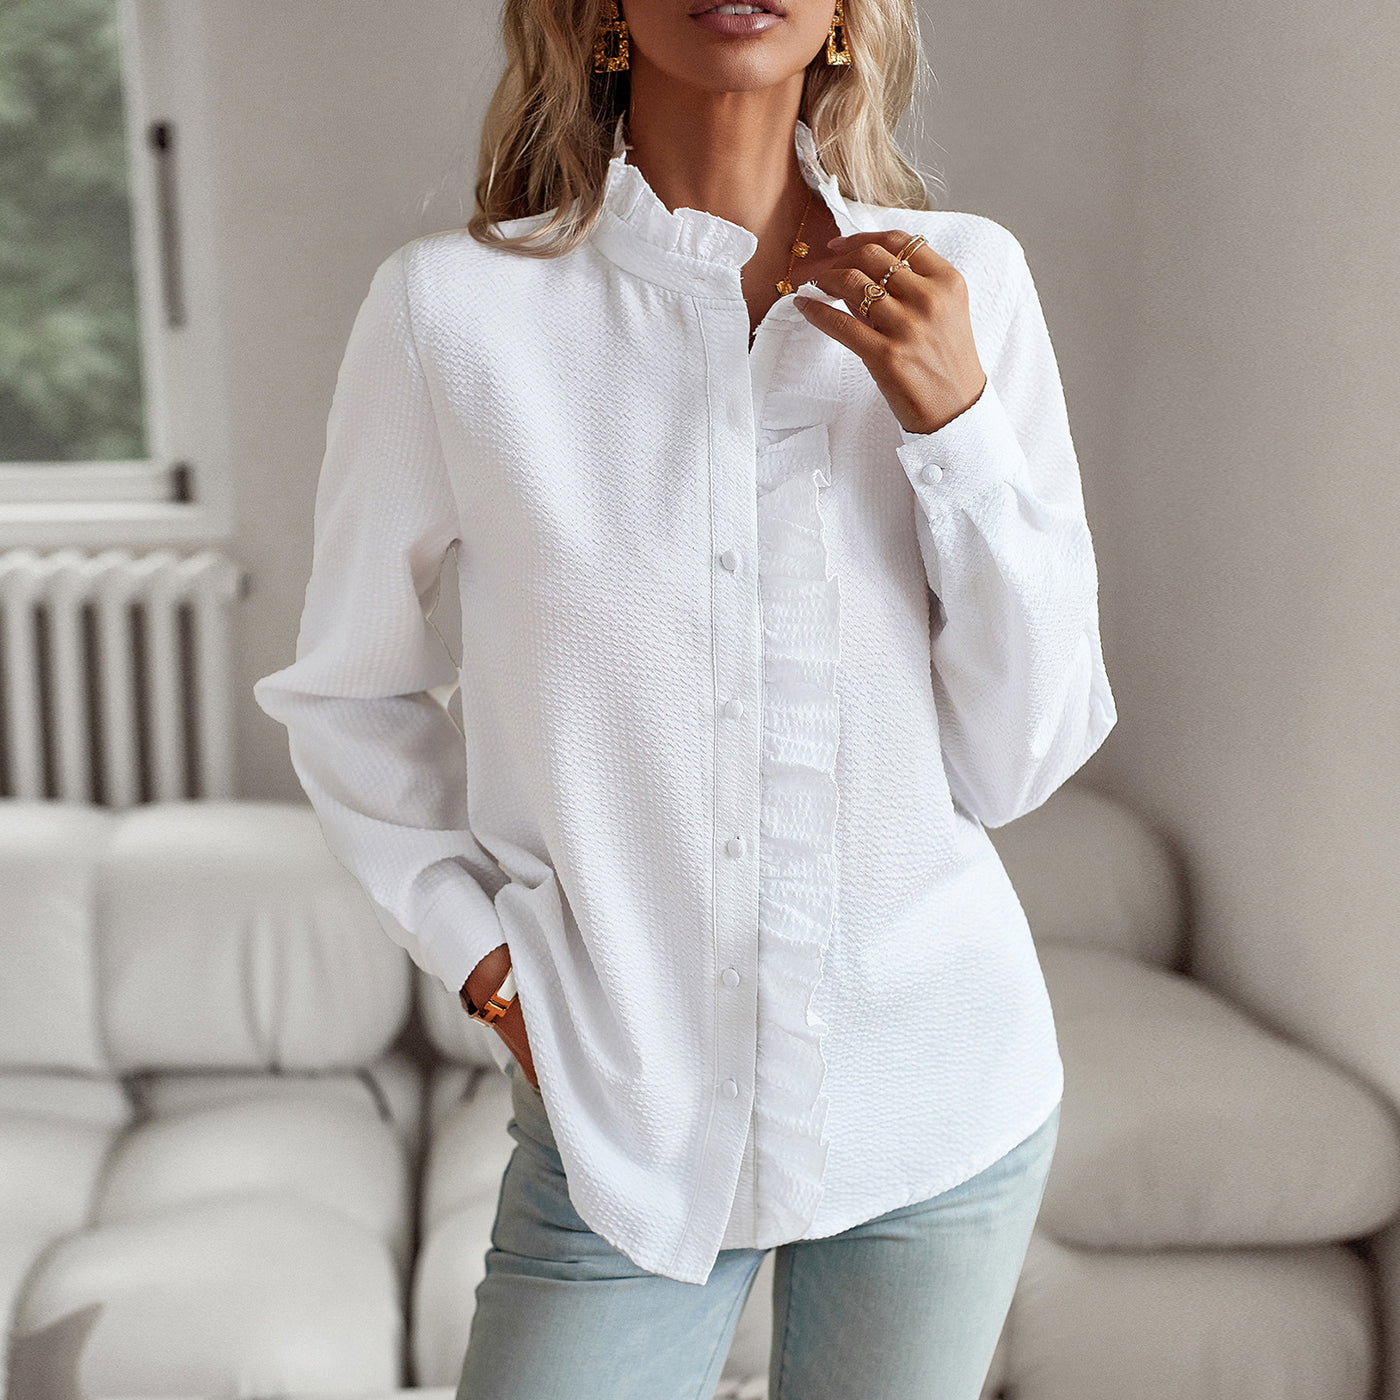 Striped Long Sleeve Shirt Fashion Ruffle Design Button Up Tops Casual Office Blouse Elegant Commuting Women's Clothing - Carvan Mart